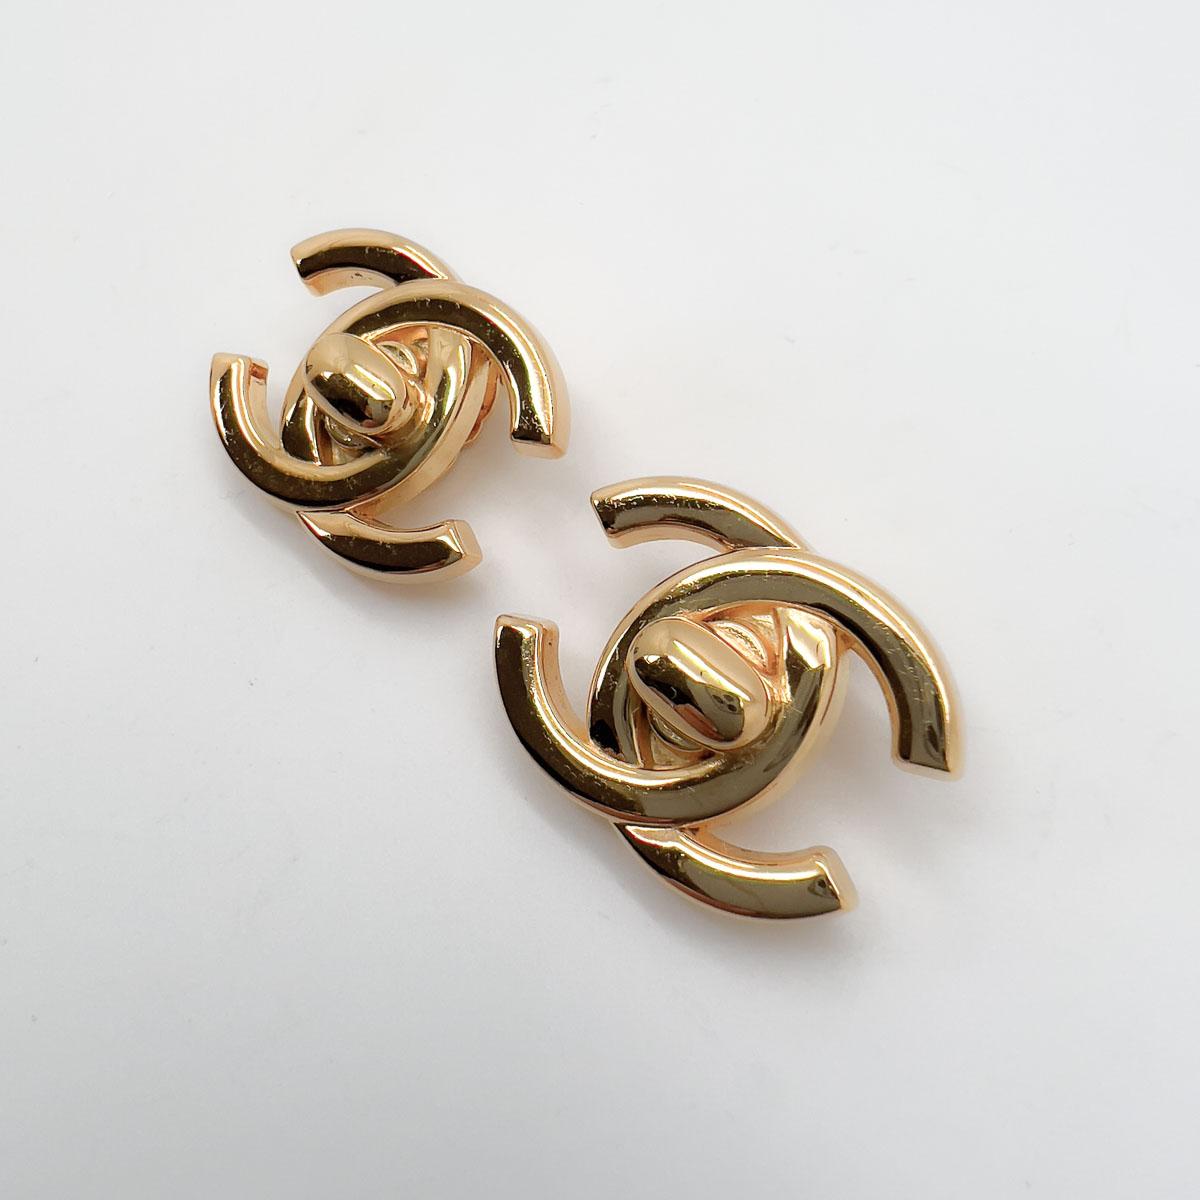 Vintage Chanel Turnlock Logo Earrings 1997 In Good Condition For Sale In Wilmslow, GB